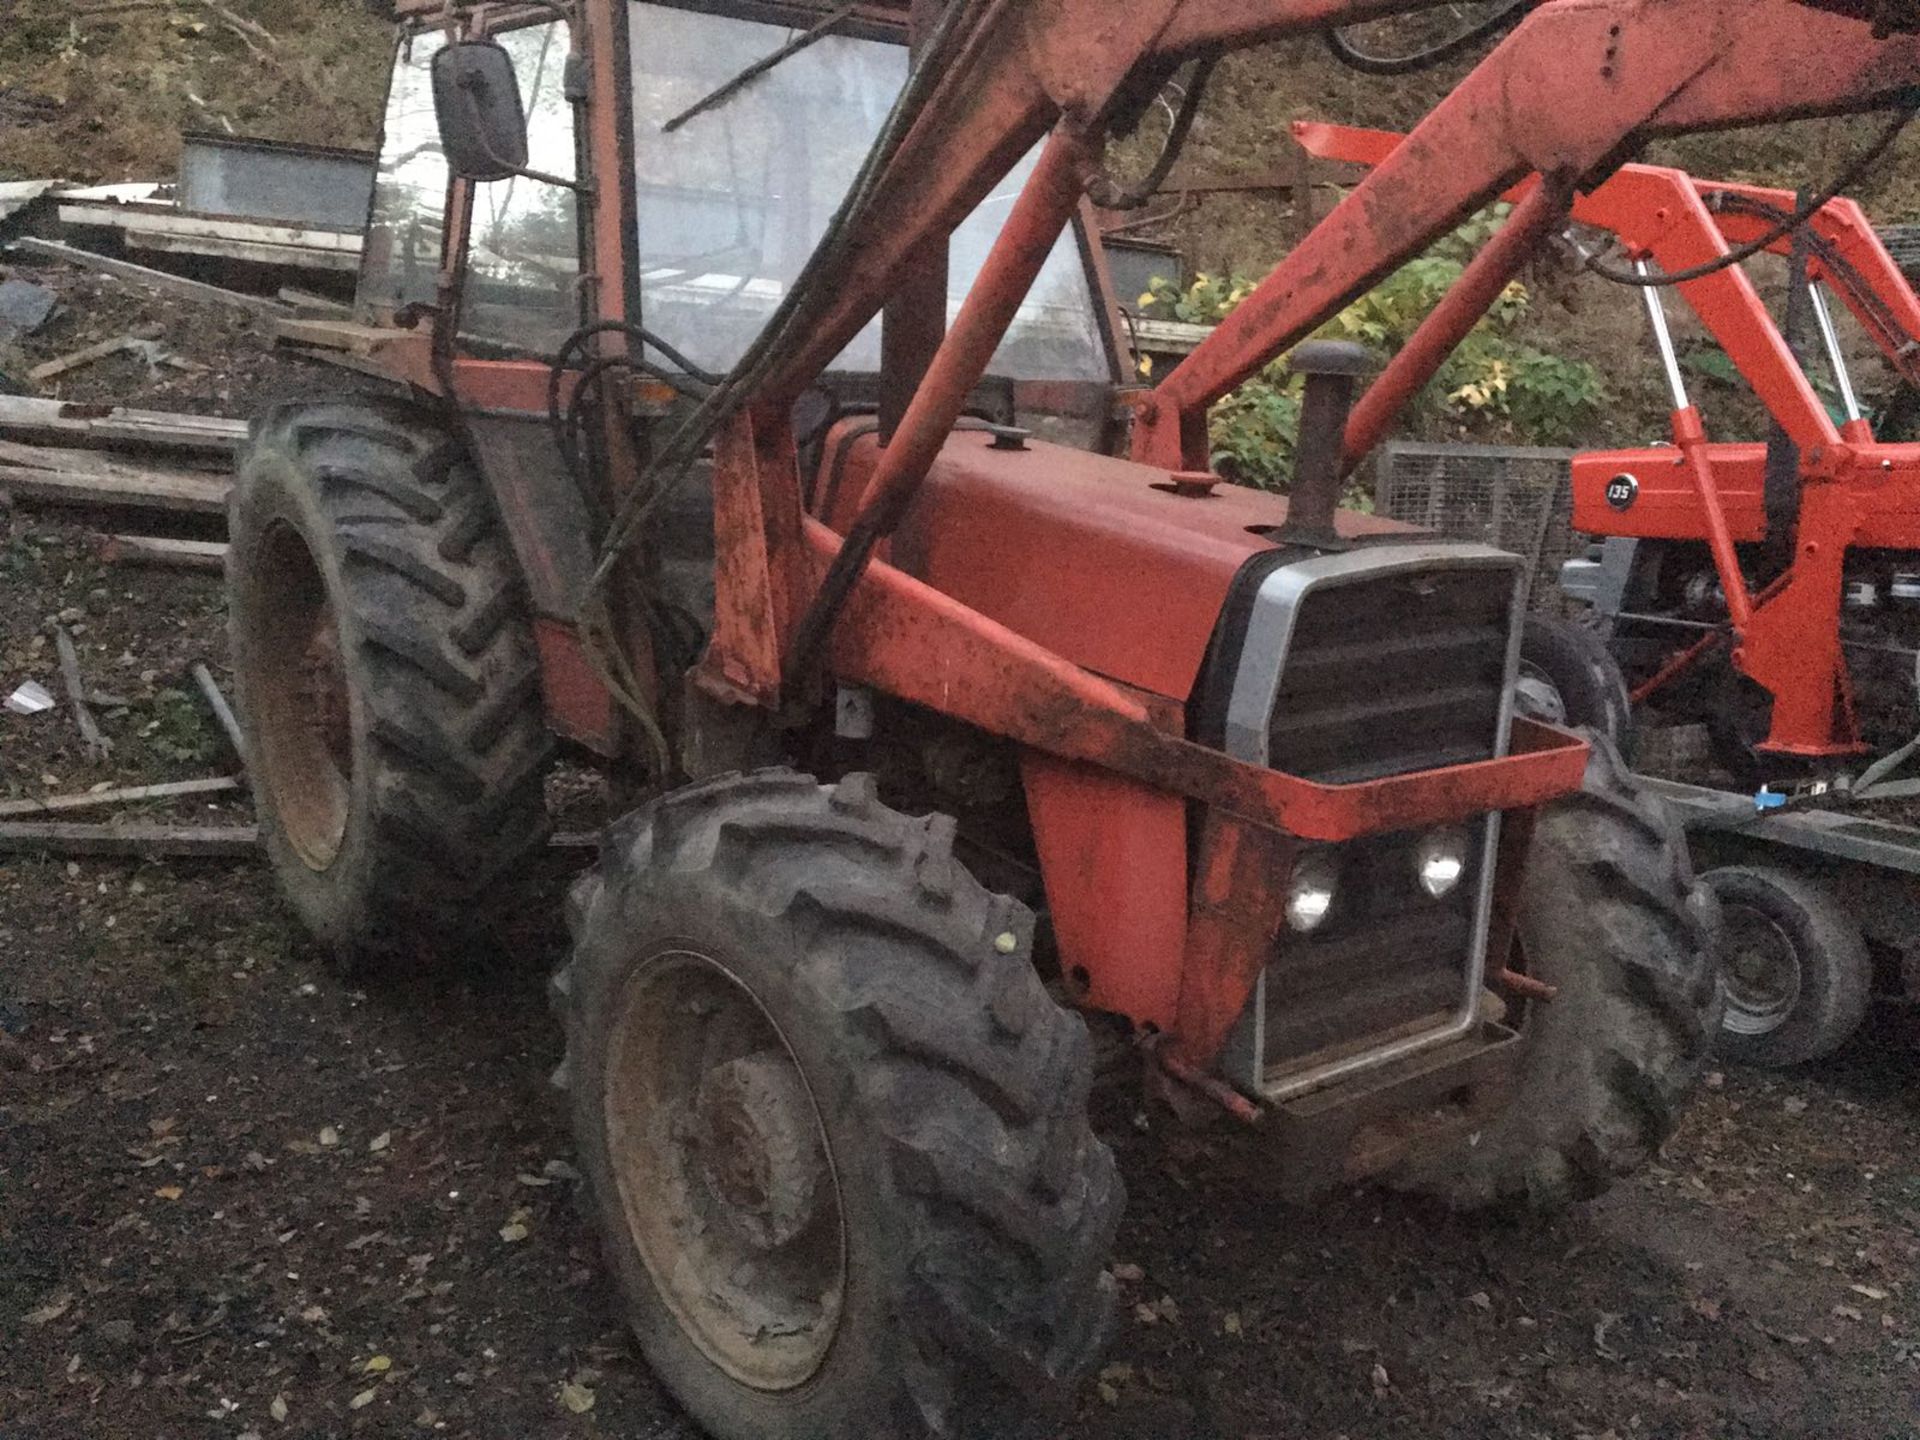 MASSEY FERGUSON 290 4X4 TRACTOR, WITH LOADER AND BALE SQUEEZE, 3200 HRS, 2 OWNERS. LOCATION: